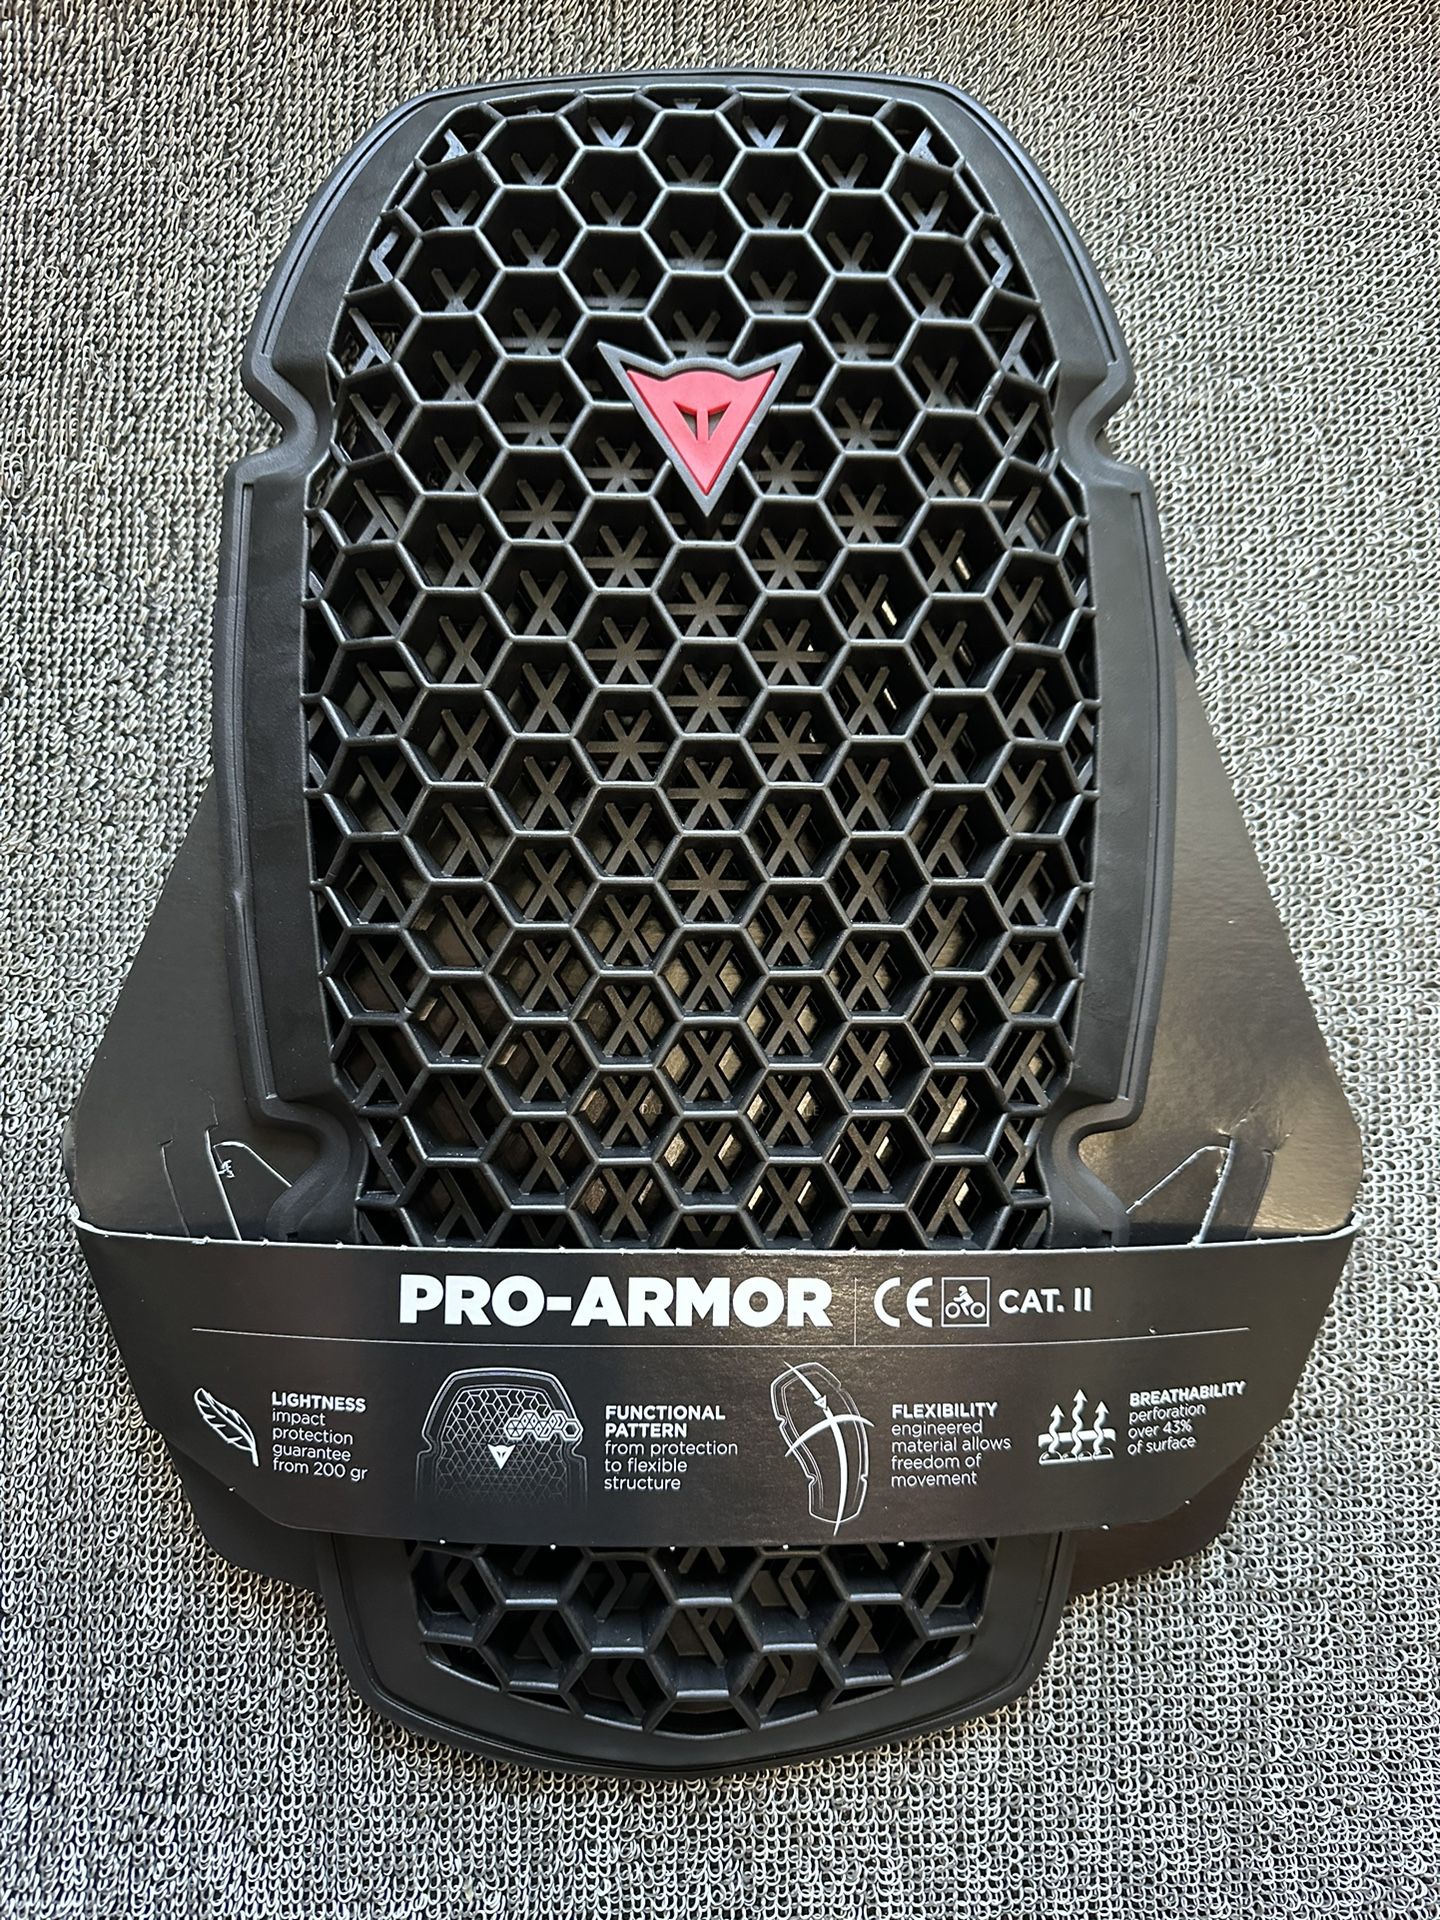 BRAND NEW - Dainese Pro-Armor G1 Back Protector - CE Level 2